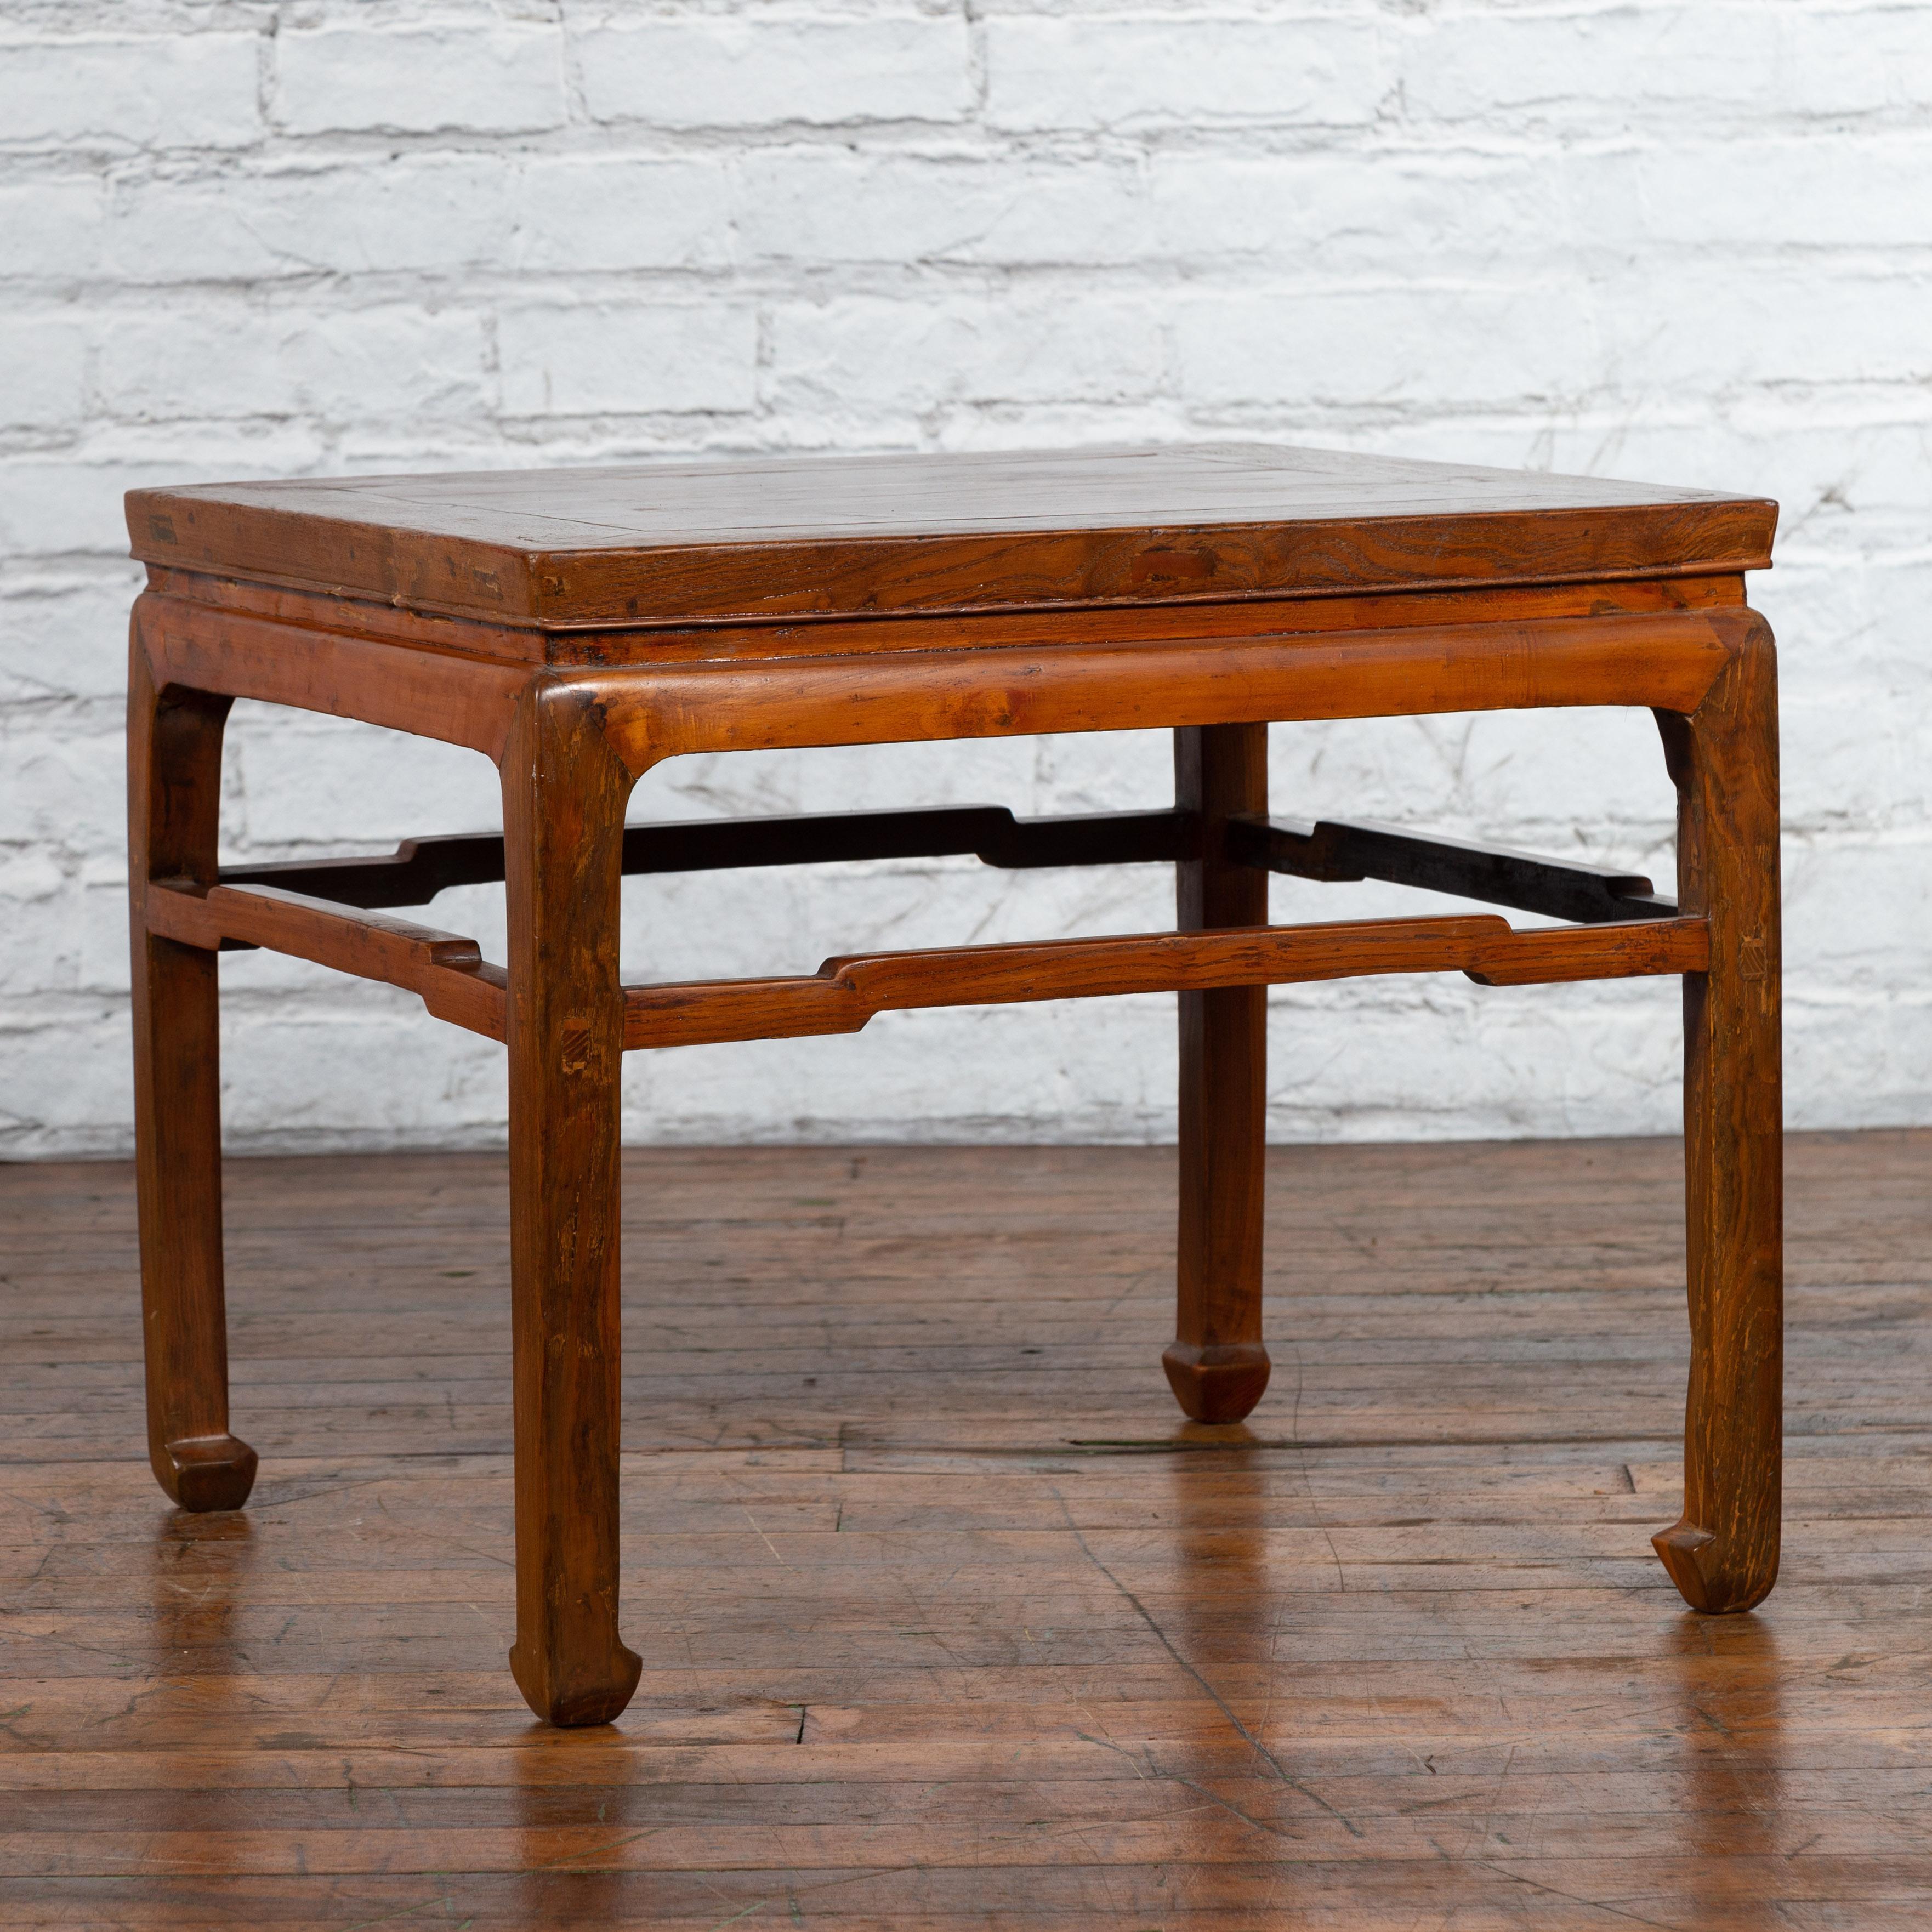 A Chinese Ming Dynasty style coffee table from the early 20th century, with humpbacked stretcher, horsehoof feet and waisted apron. Created in China during the early years of the 20th century, this coffee table features a square top with central